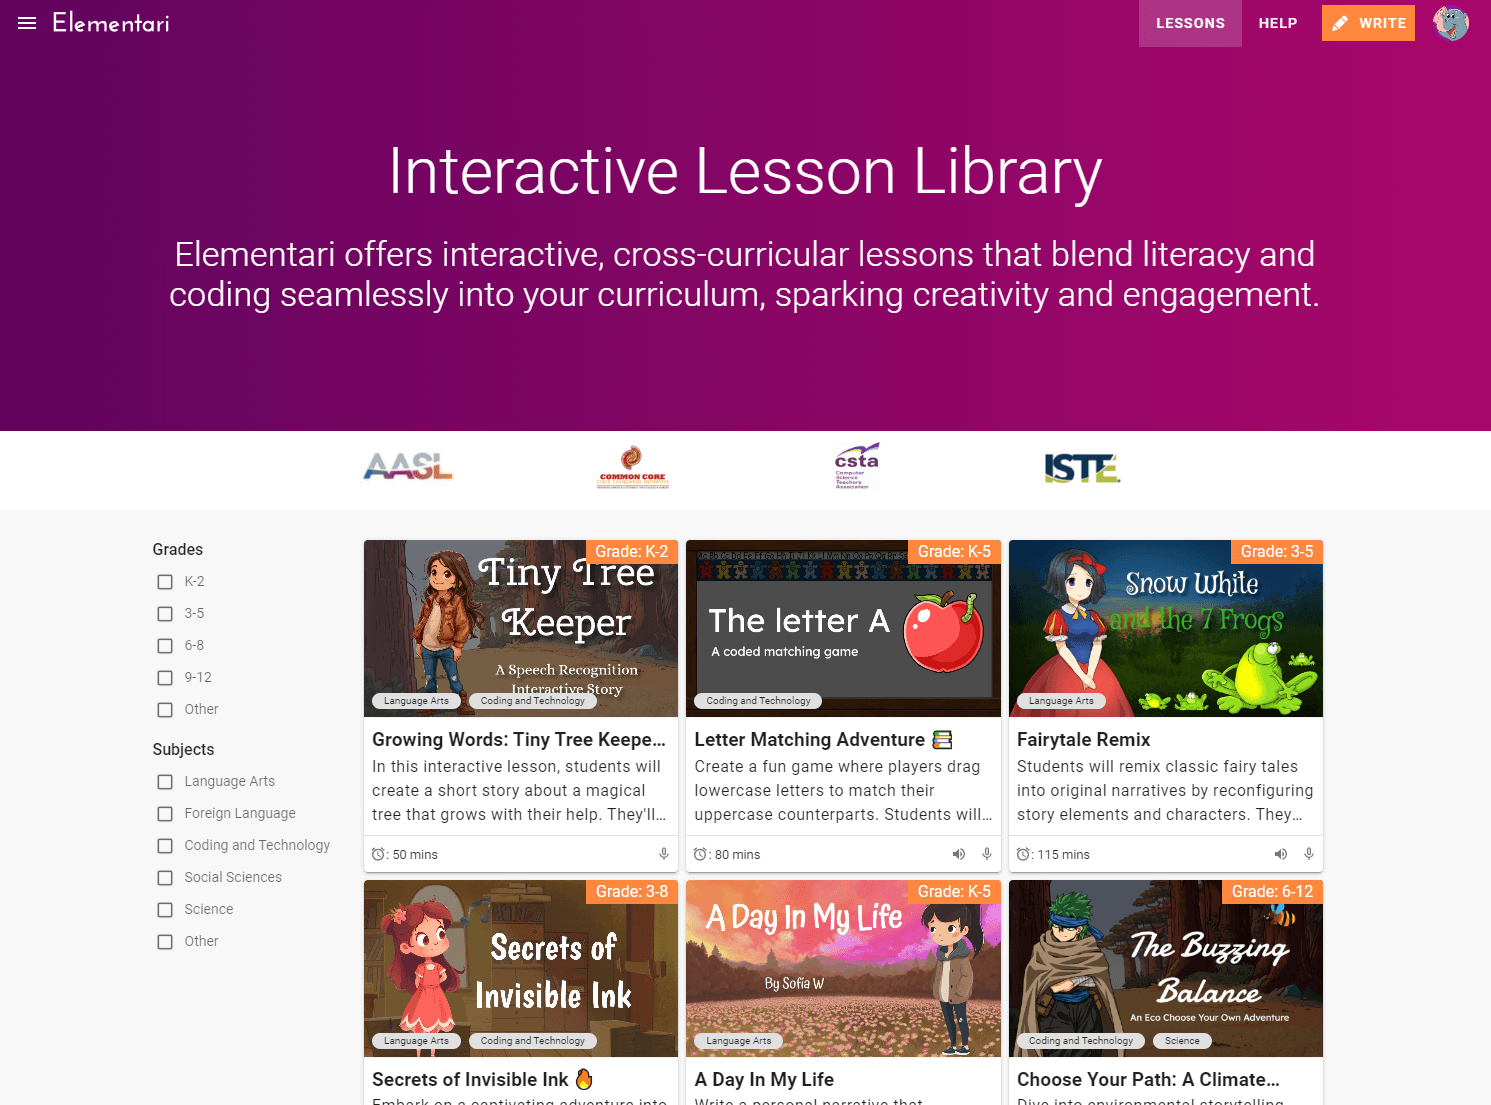 Explore lessons by grade and subject in the Lesson Library.